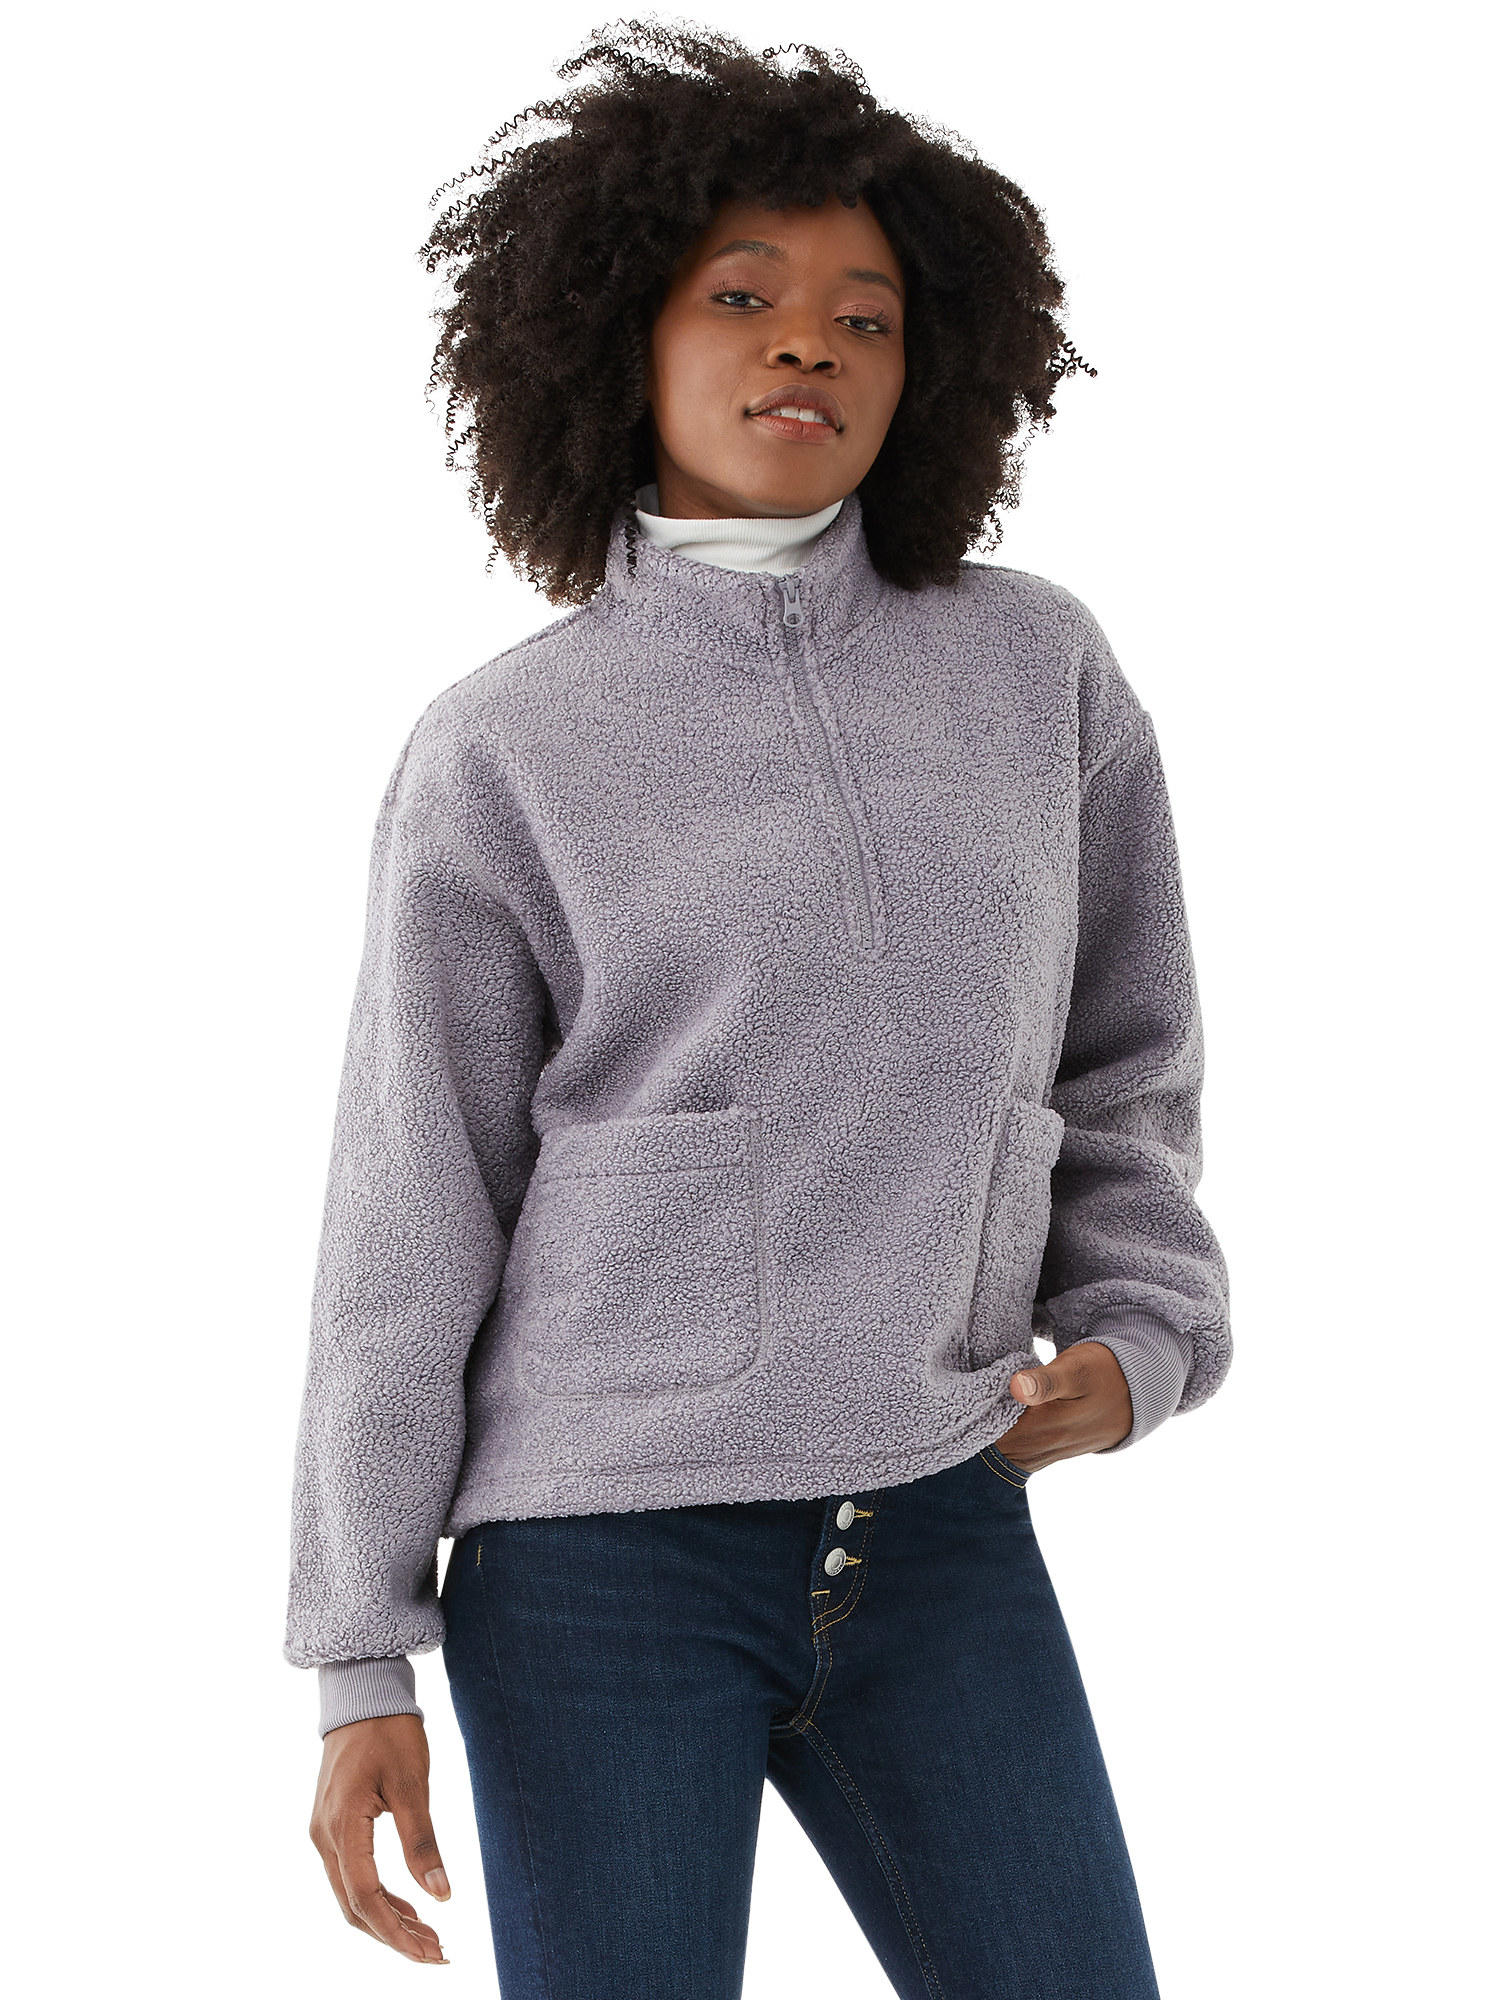 Model wearing a purple pullover with zipper